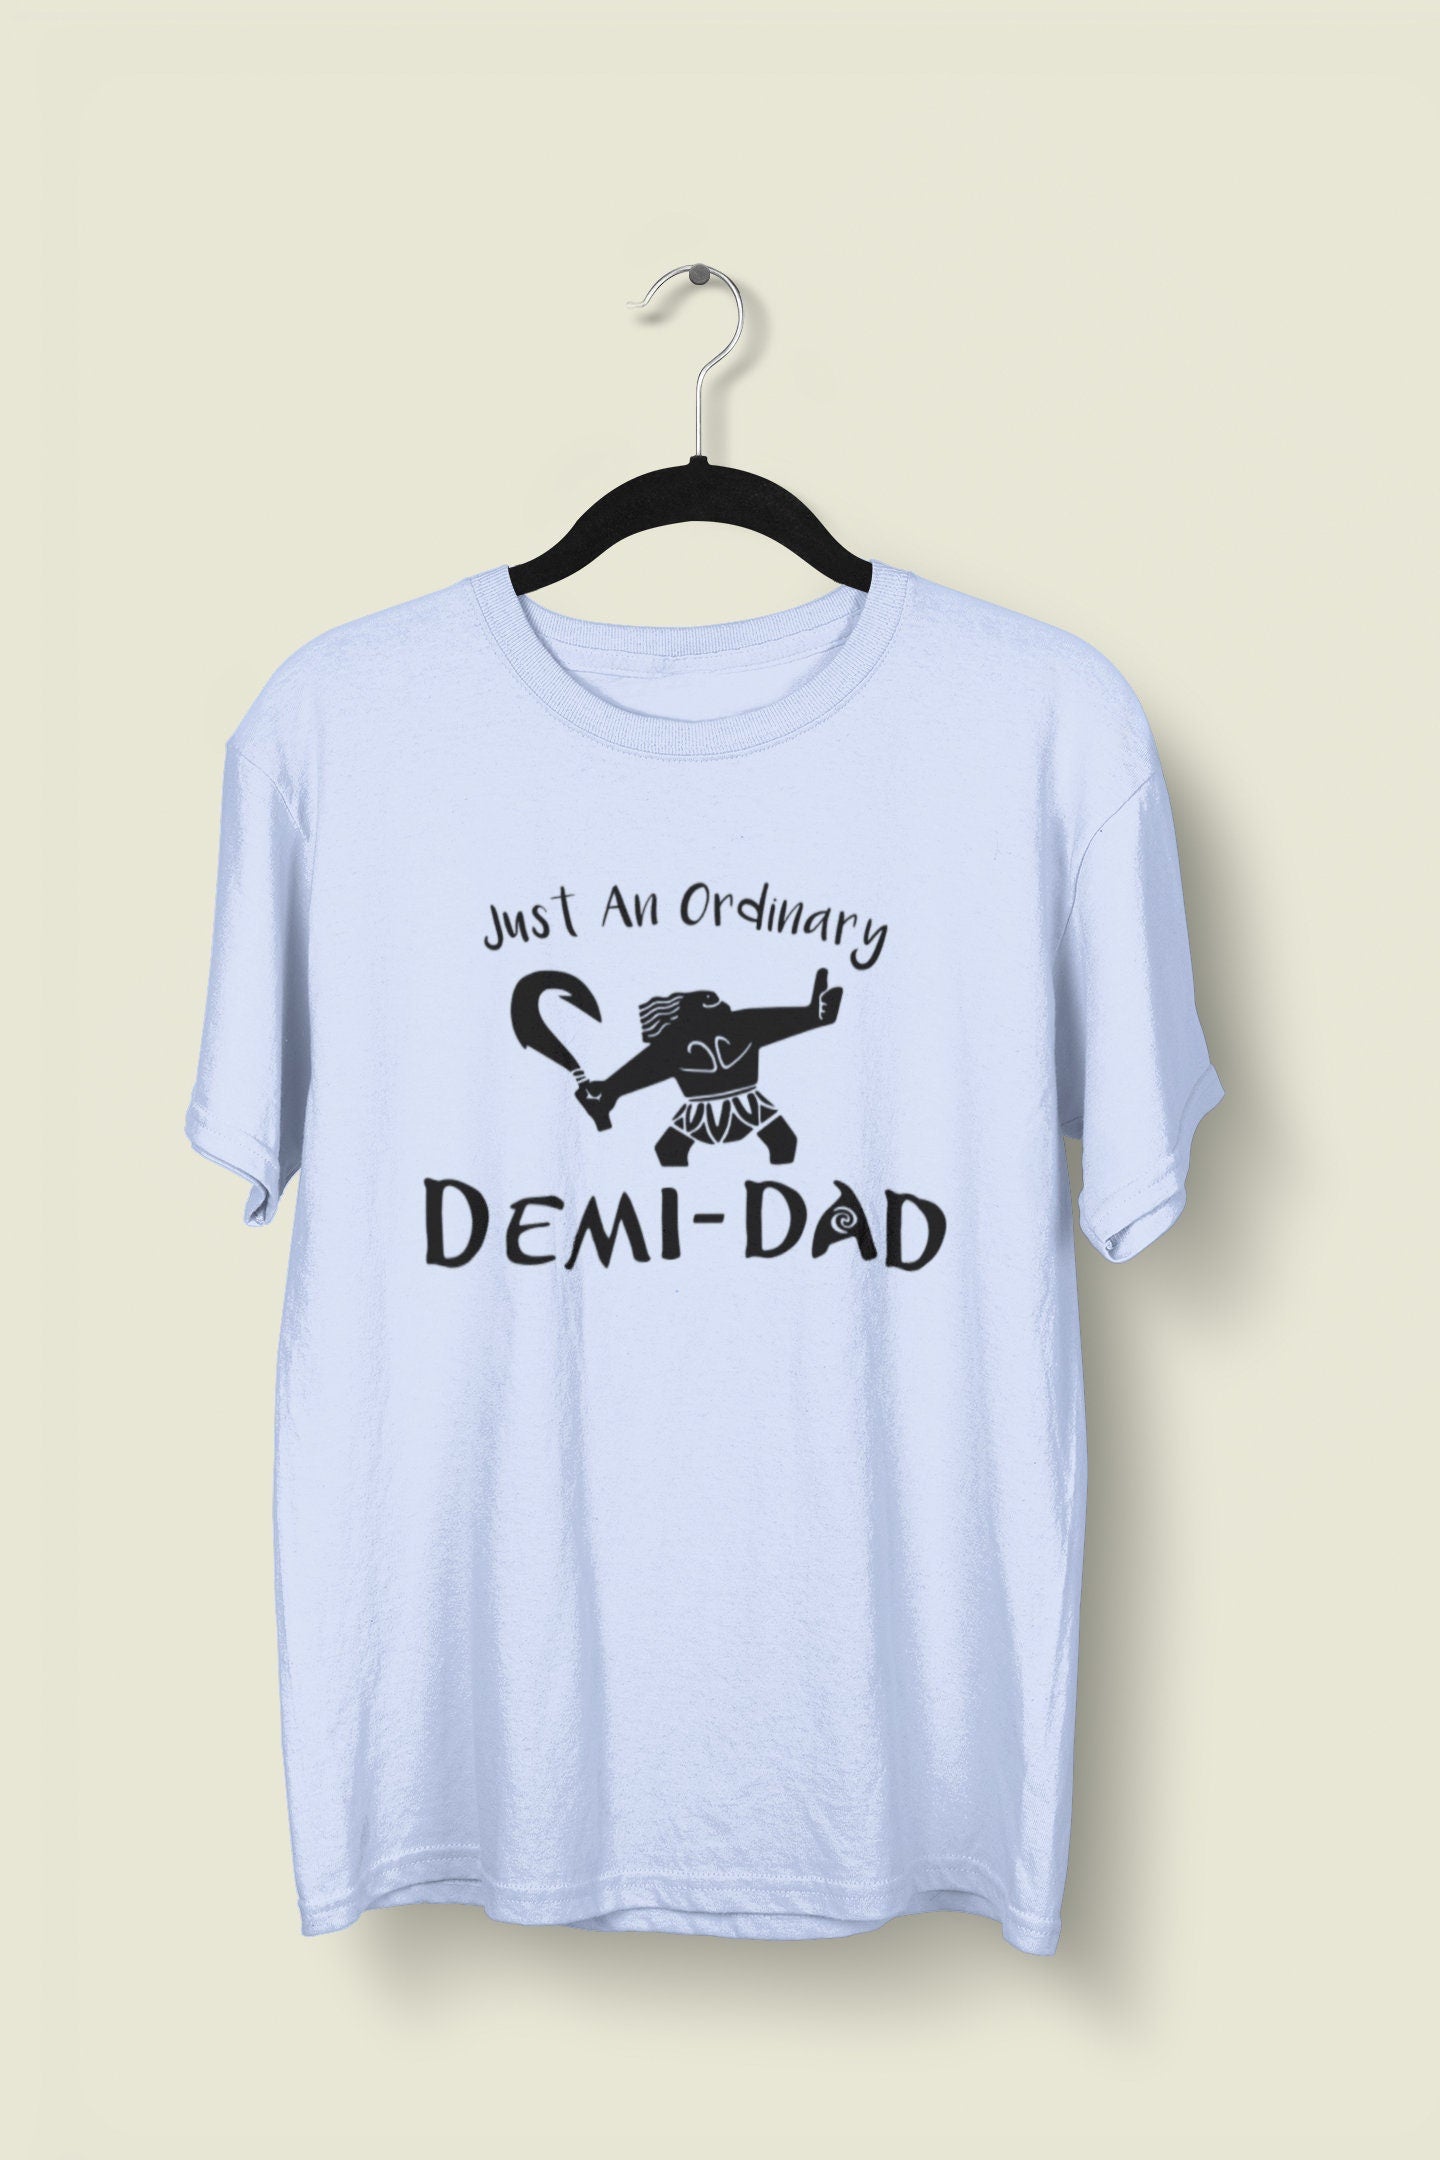 Just Your Ordinary Demi-Dad Moana inspired Father's Day shirt